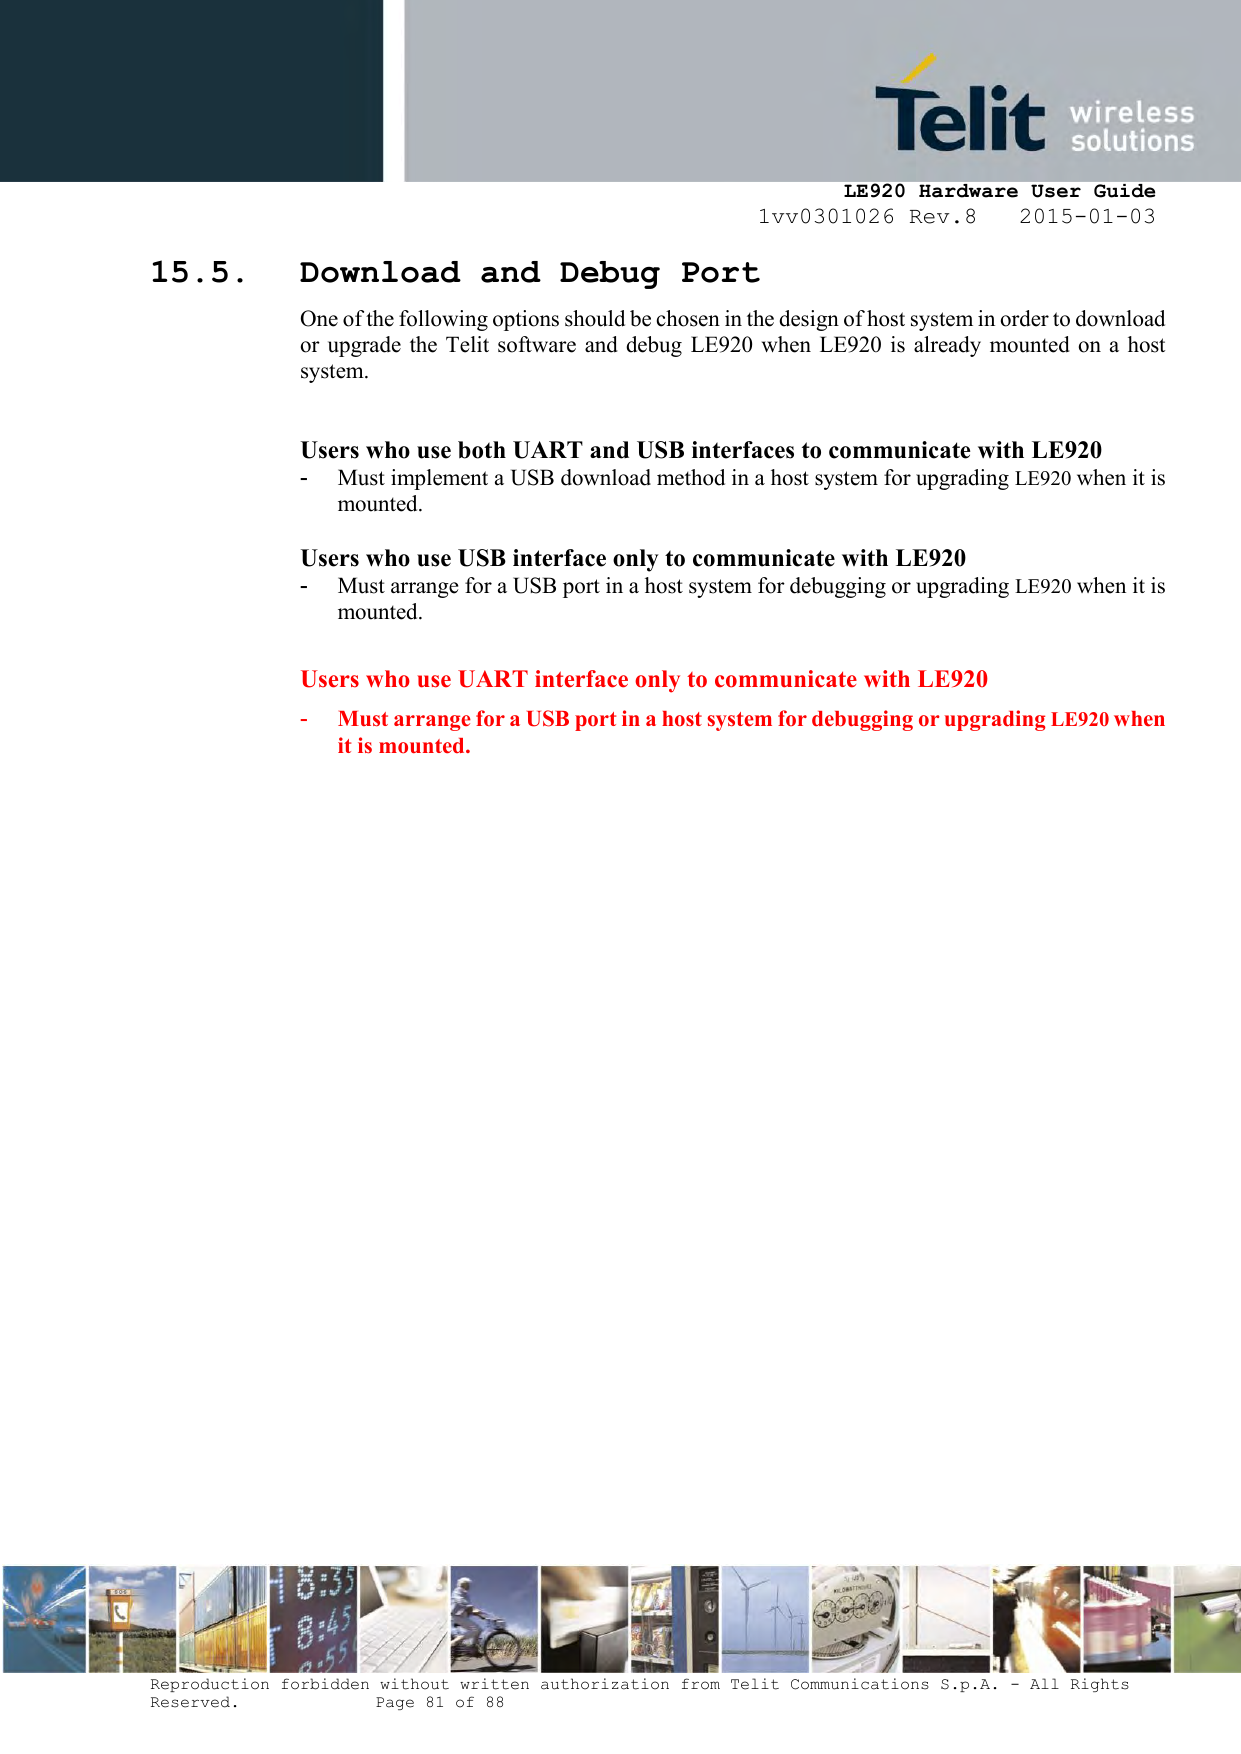     LE920 Hardware User Guide 1vv0301026 Rev.8   2015-01-03 Reproduction forbidden without written authorization from Telit Communications S.p.A. - All Rights Reserved.    Page 81 of 88  15.5. Download and Debug Port One of the following options should be chosen in the design of host system in order to download or upgrade the Telit software  and  debug LE920 when LE920 is  already mounted on a host system.  Users who use both UART and USB interfaces to communicate with LE920 -  Must implement a USB download method in a host system for upgrading LE920 when it is mounted.  Users who use USB interface only to communicate with LE920 -  Must arrange for a USB port in a host system for debugging or upgrading LE920 when it is mounted.  Users who use UART interface only to communicate with LE920 -  Must arrange for a USB port in a host system for debugging or upgrading LE920 when it is mounted.   